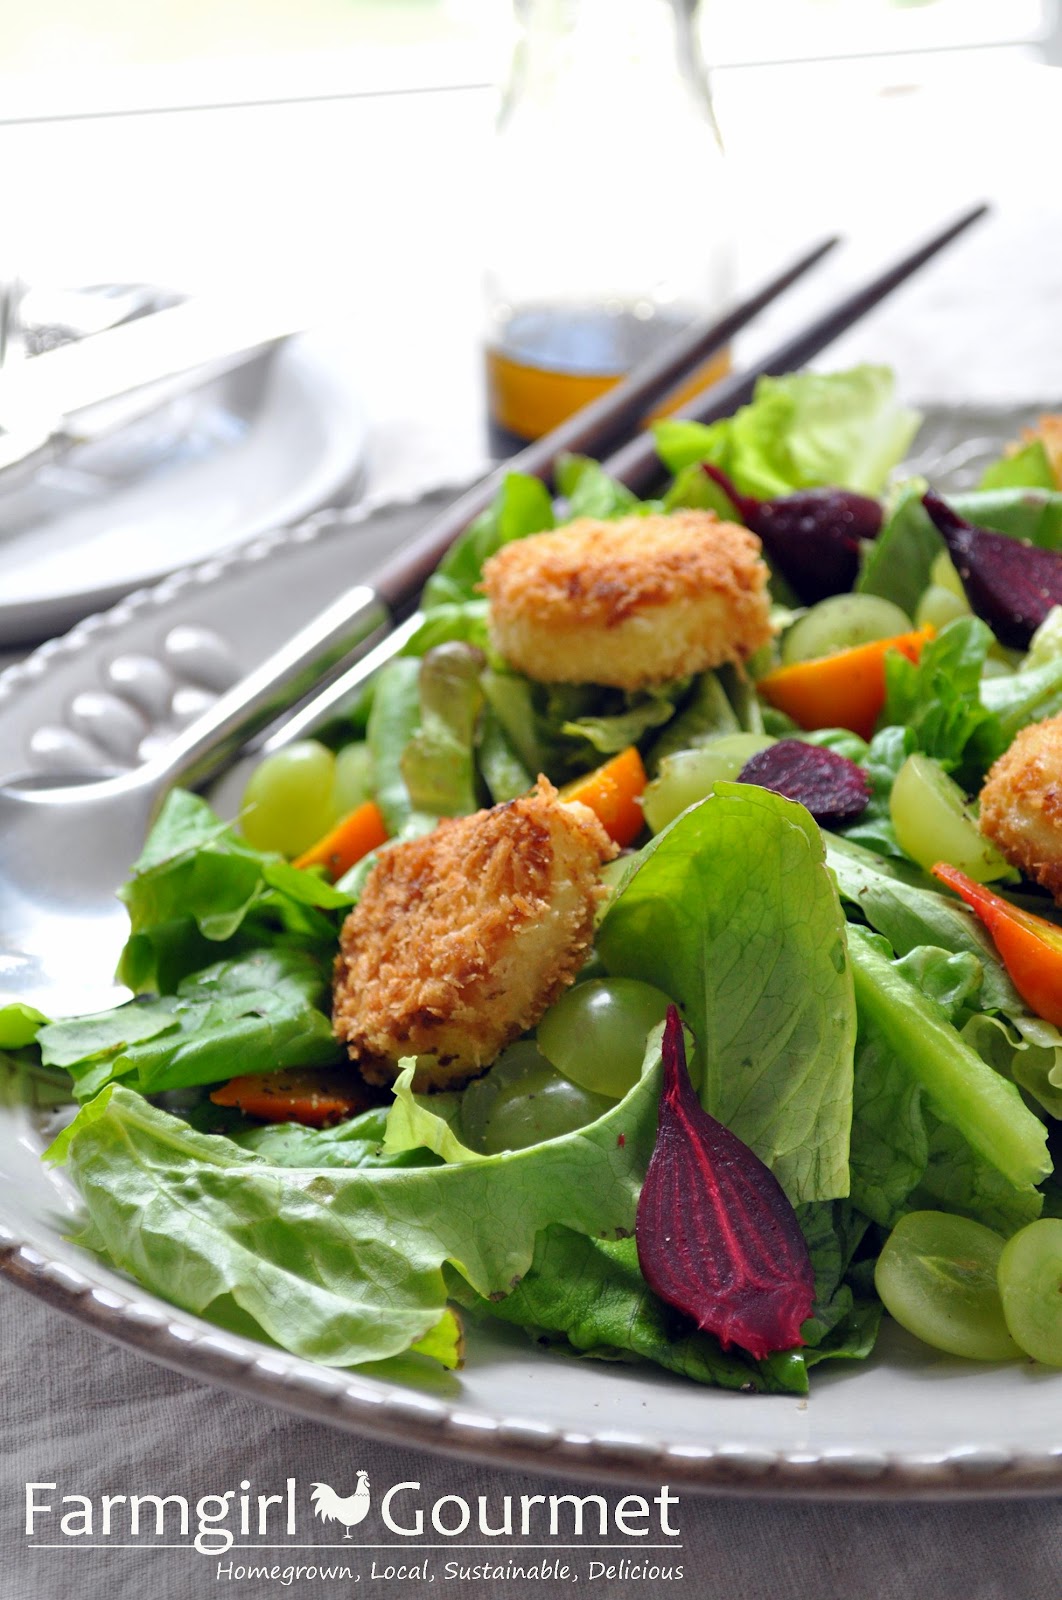 Fried Goat Cheese Salad Recipe